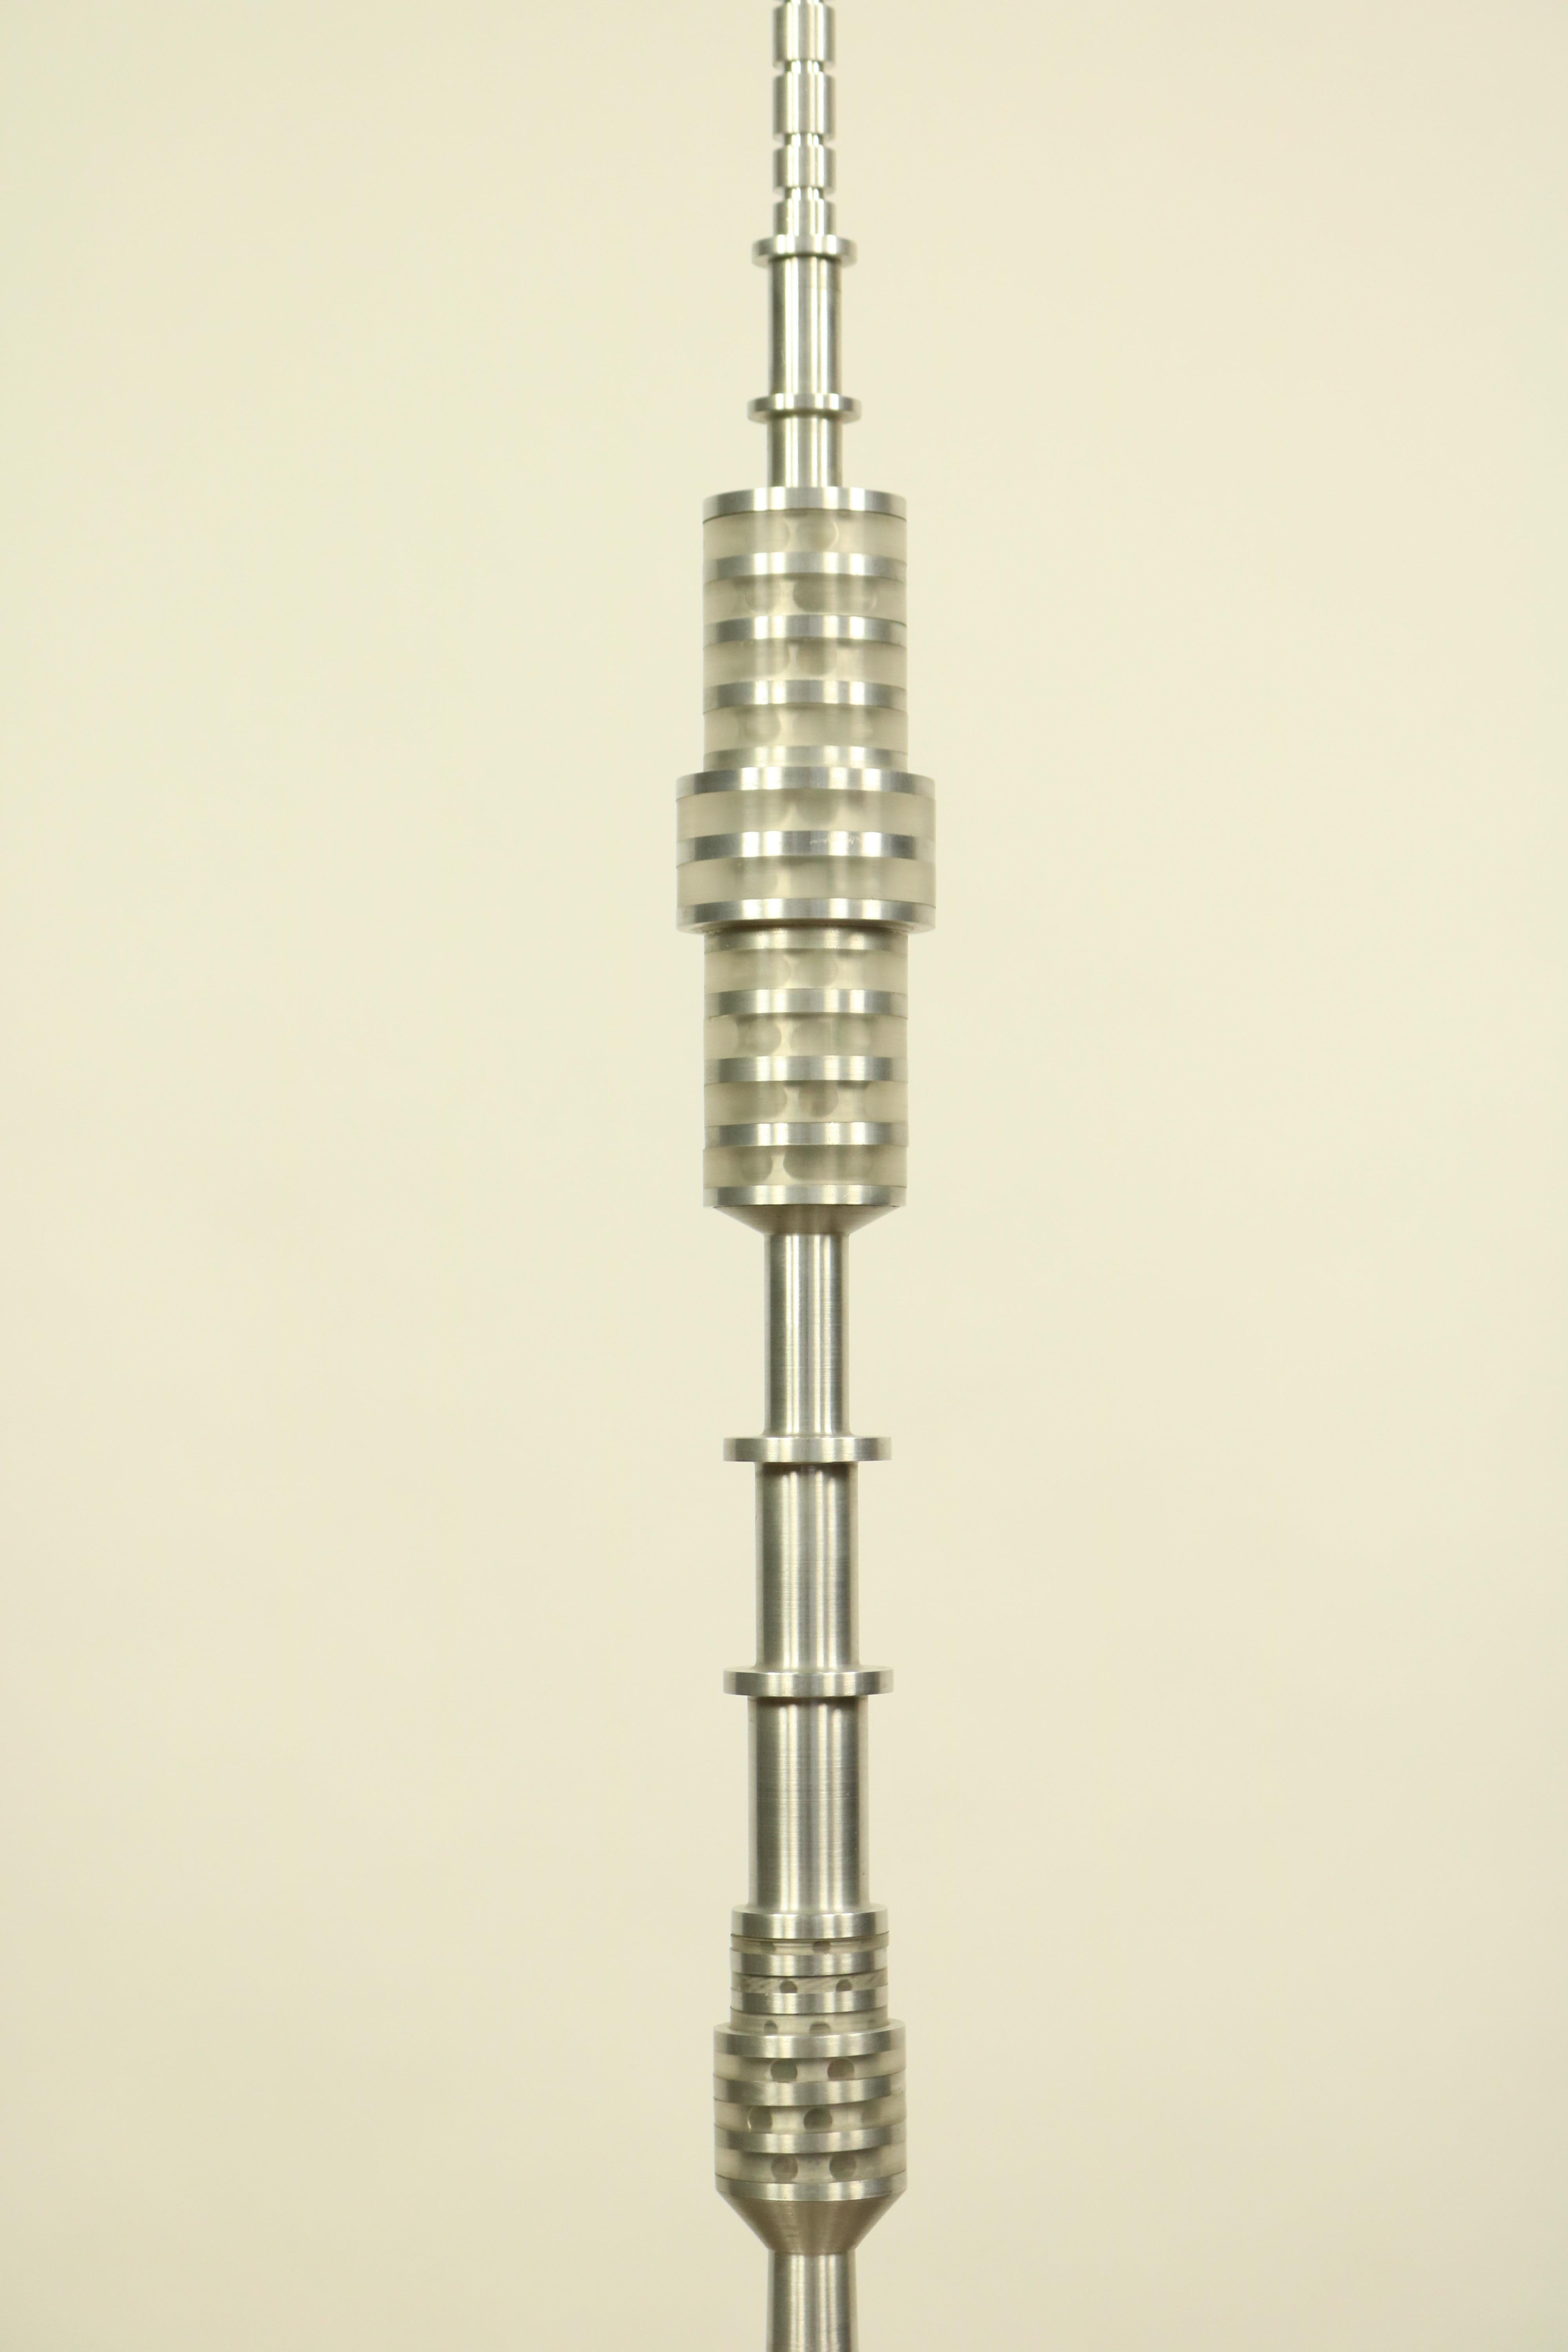 German Extra Large Moscow TV Tower Ostankino Iluminated Aluminum Model, 1970s For Sale